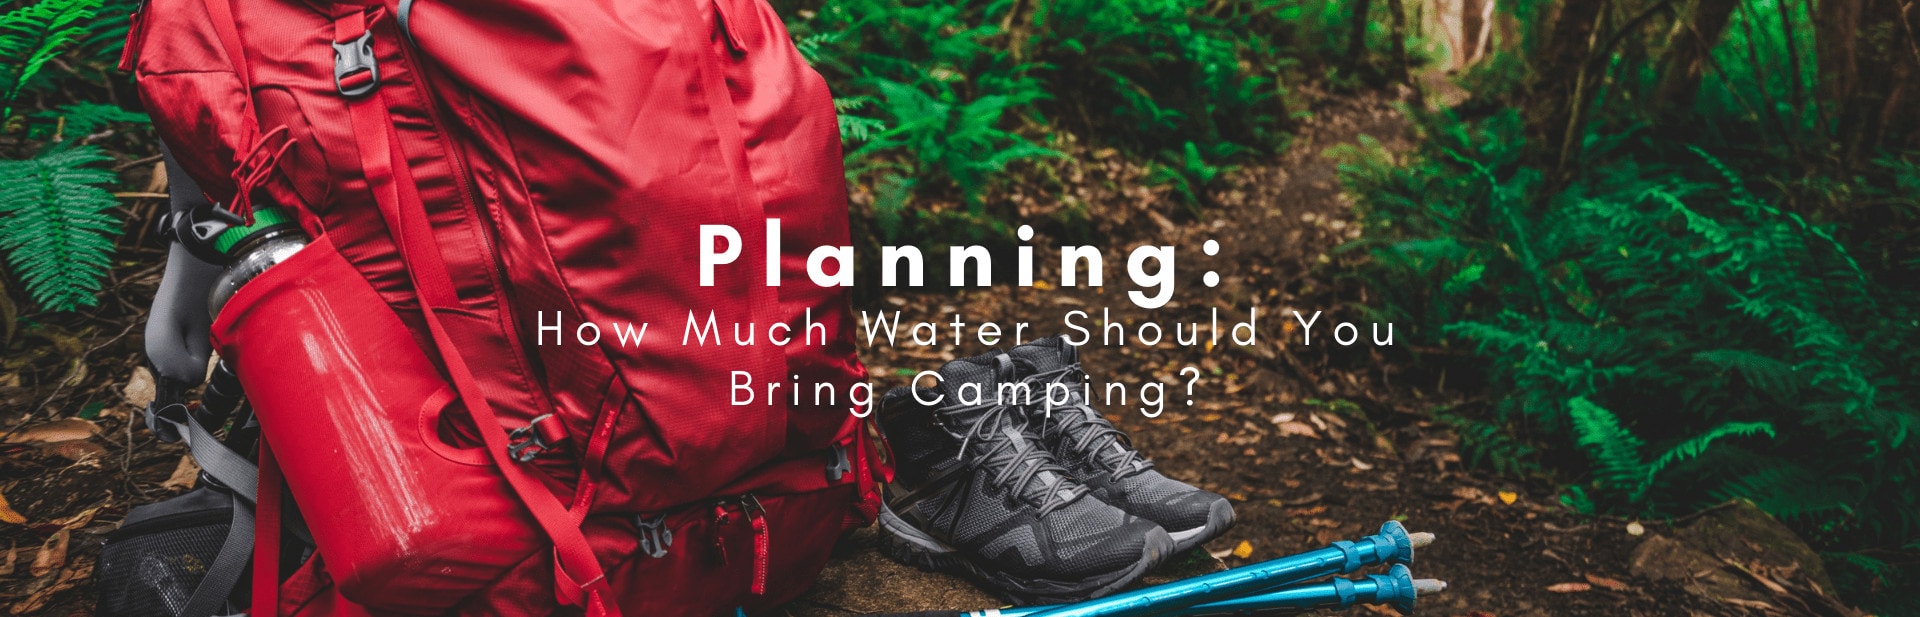 How Much Water Should I Bring Camping?